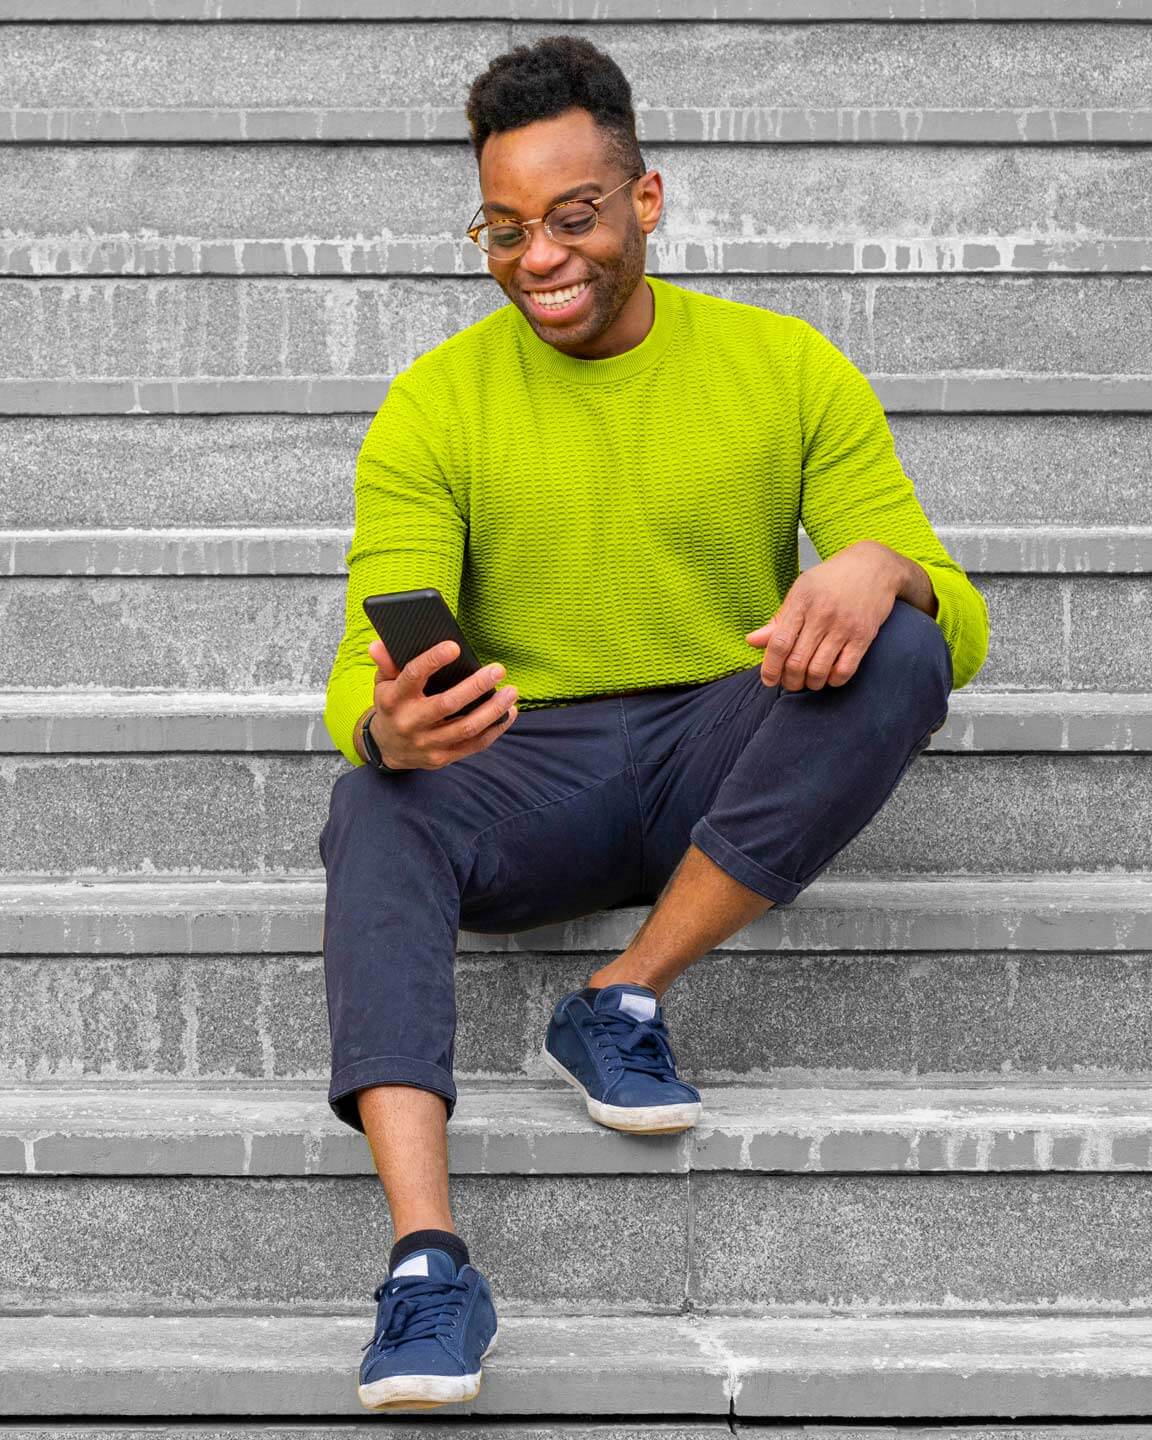 A smiling man sitting on some stairs looking at his phone